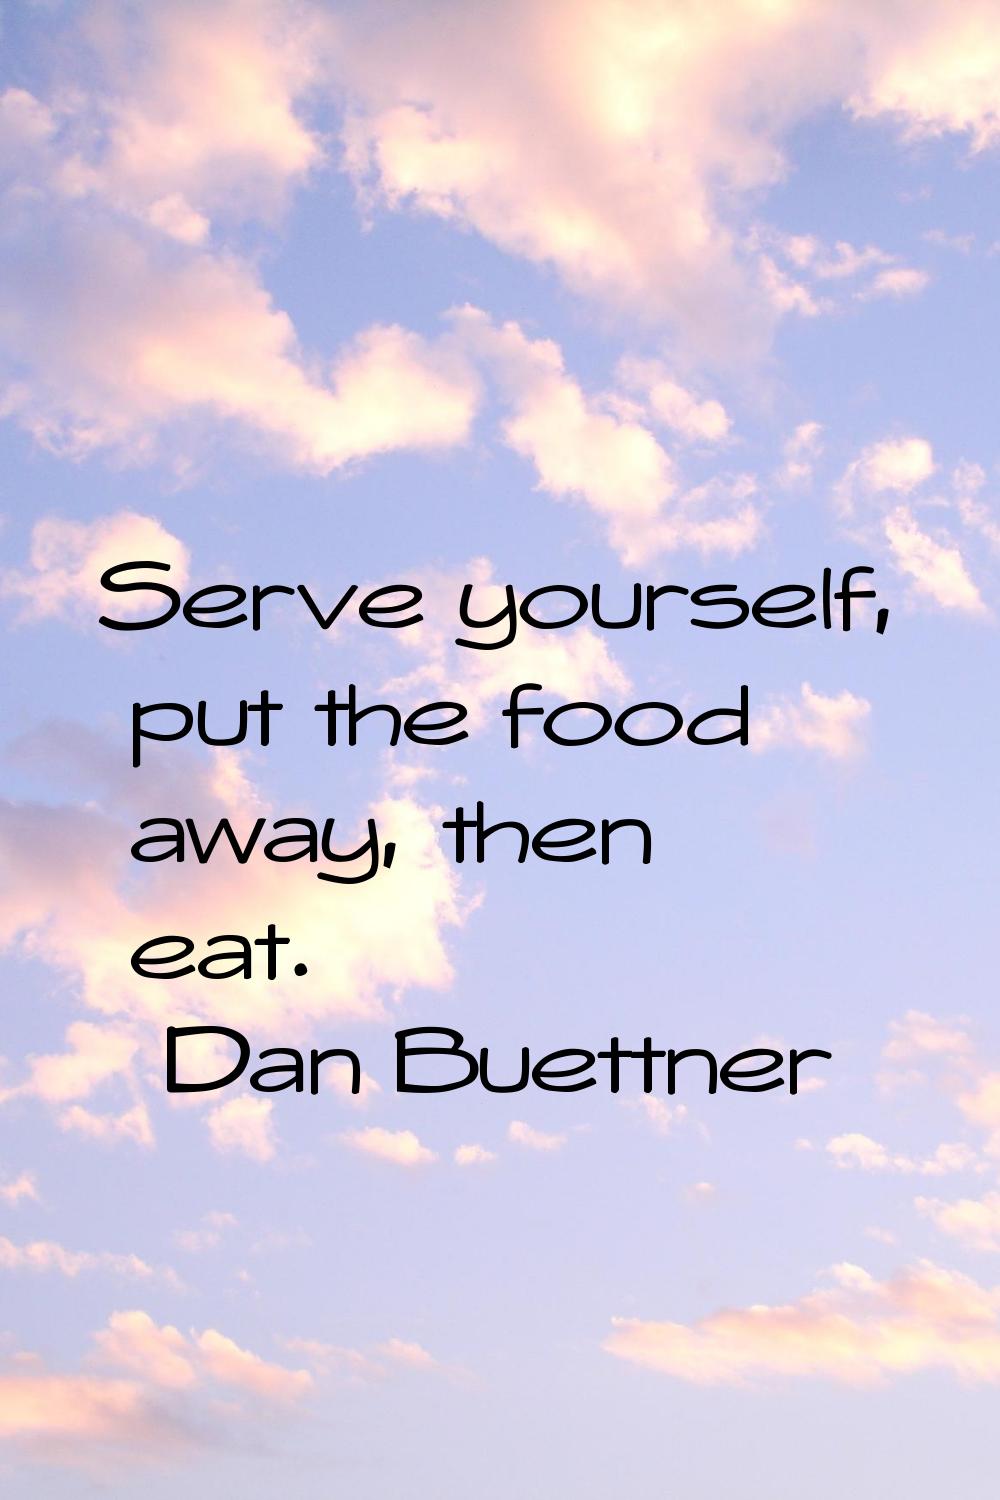 Serve yourself, put the food away, then eat.